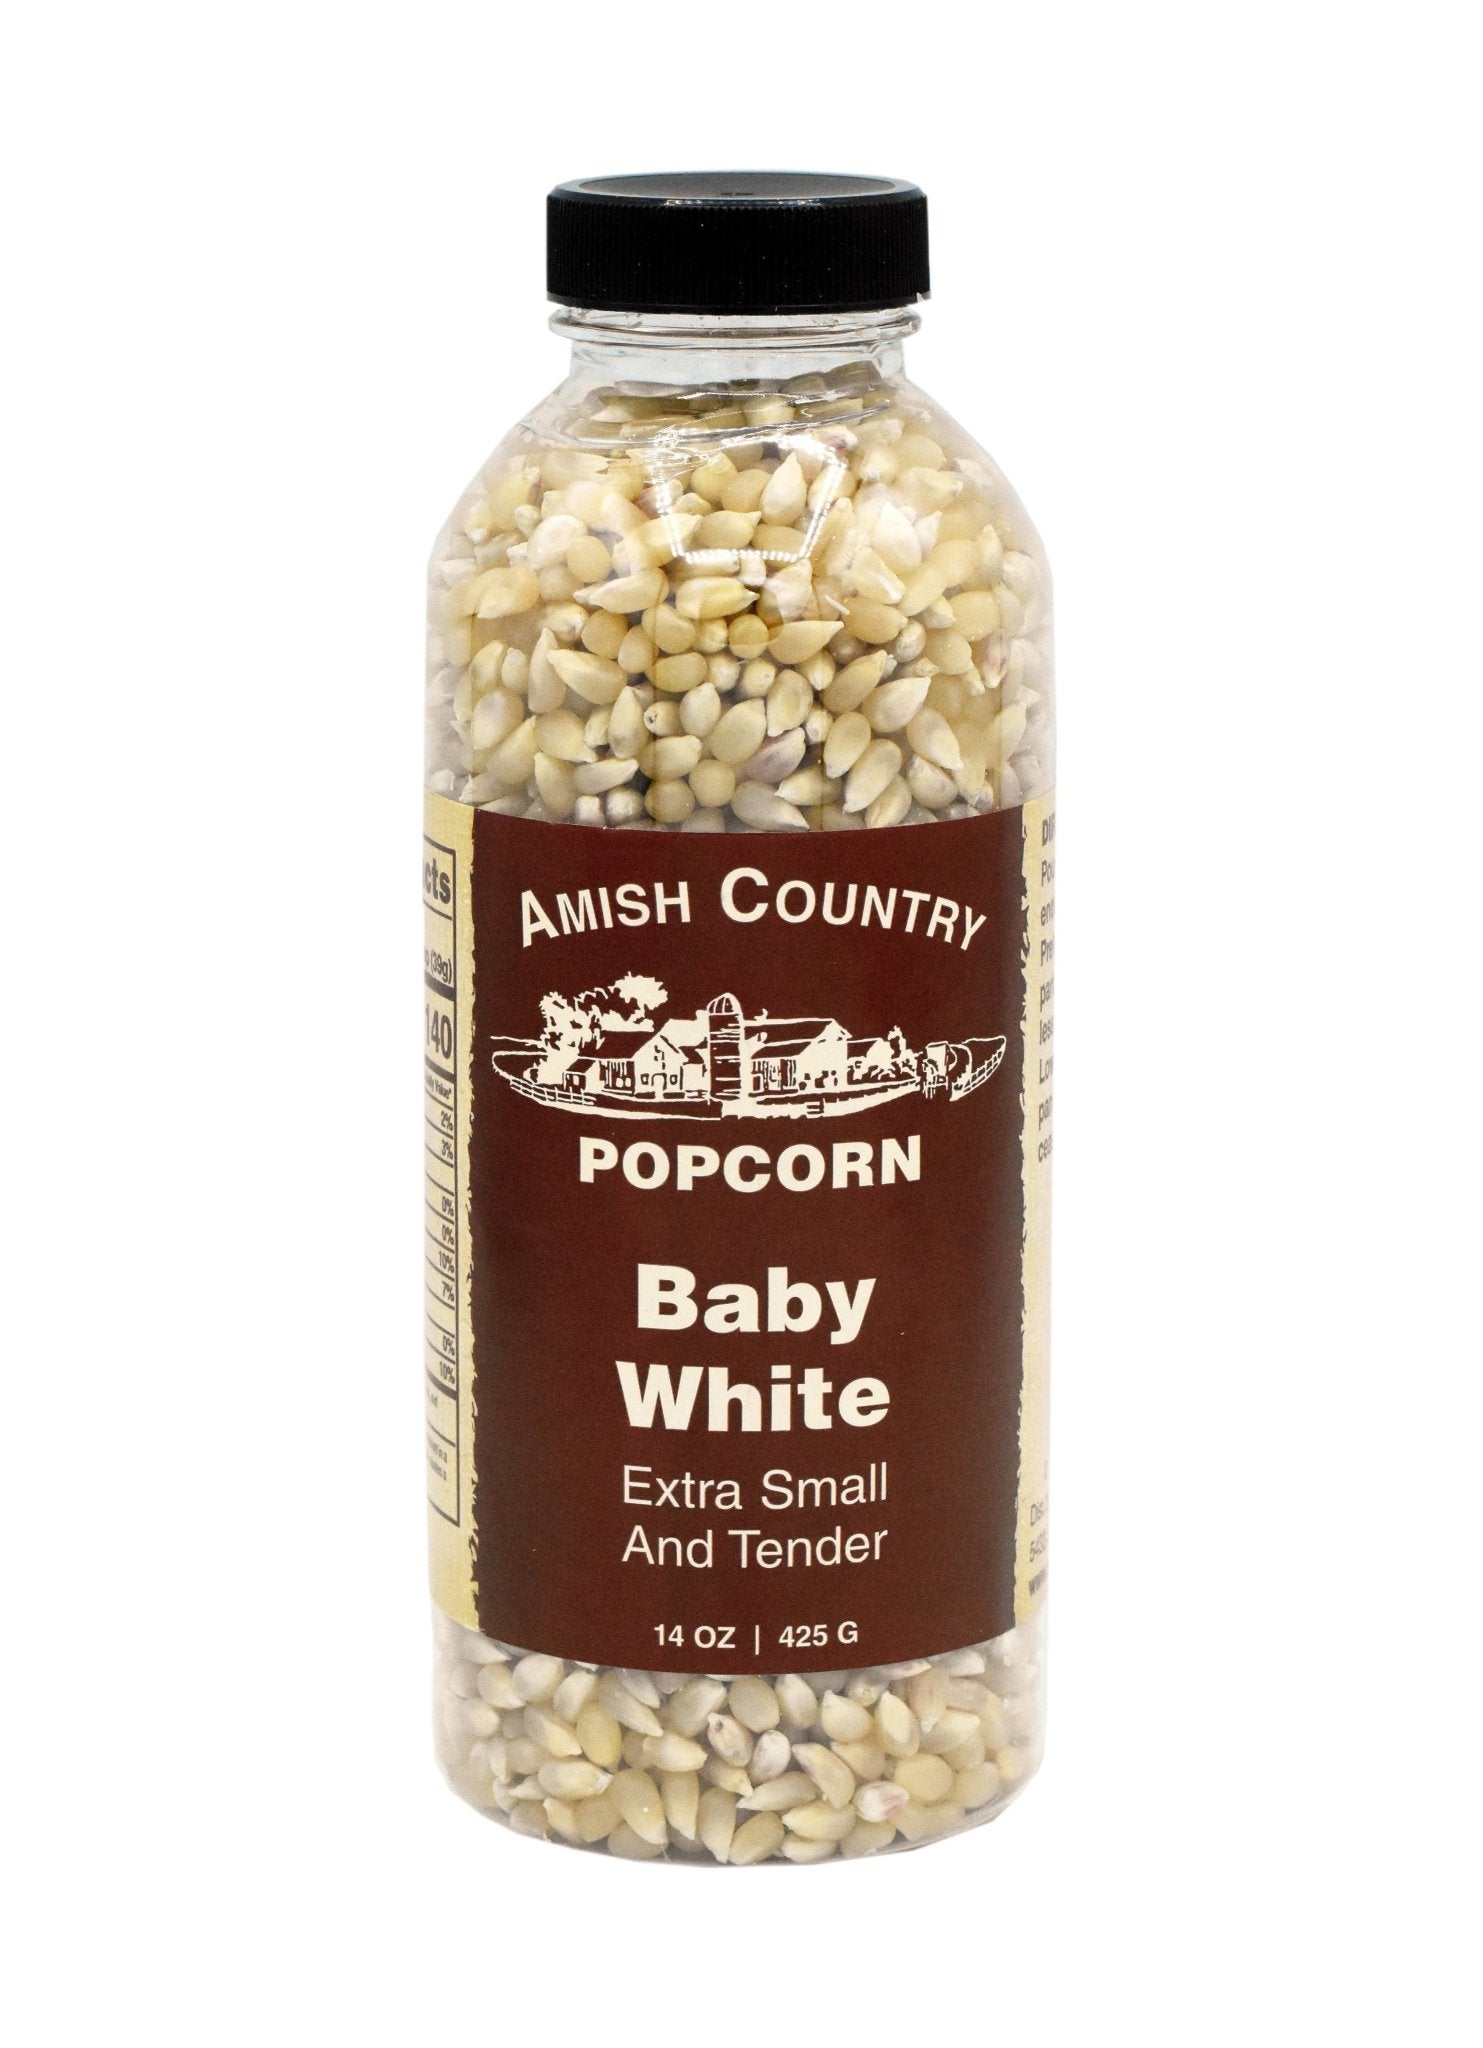 Amish Country Popcorn - 14oz Bottle of Baby White Popcorn - Pacific Flyway Supplies